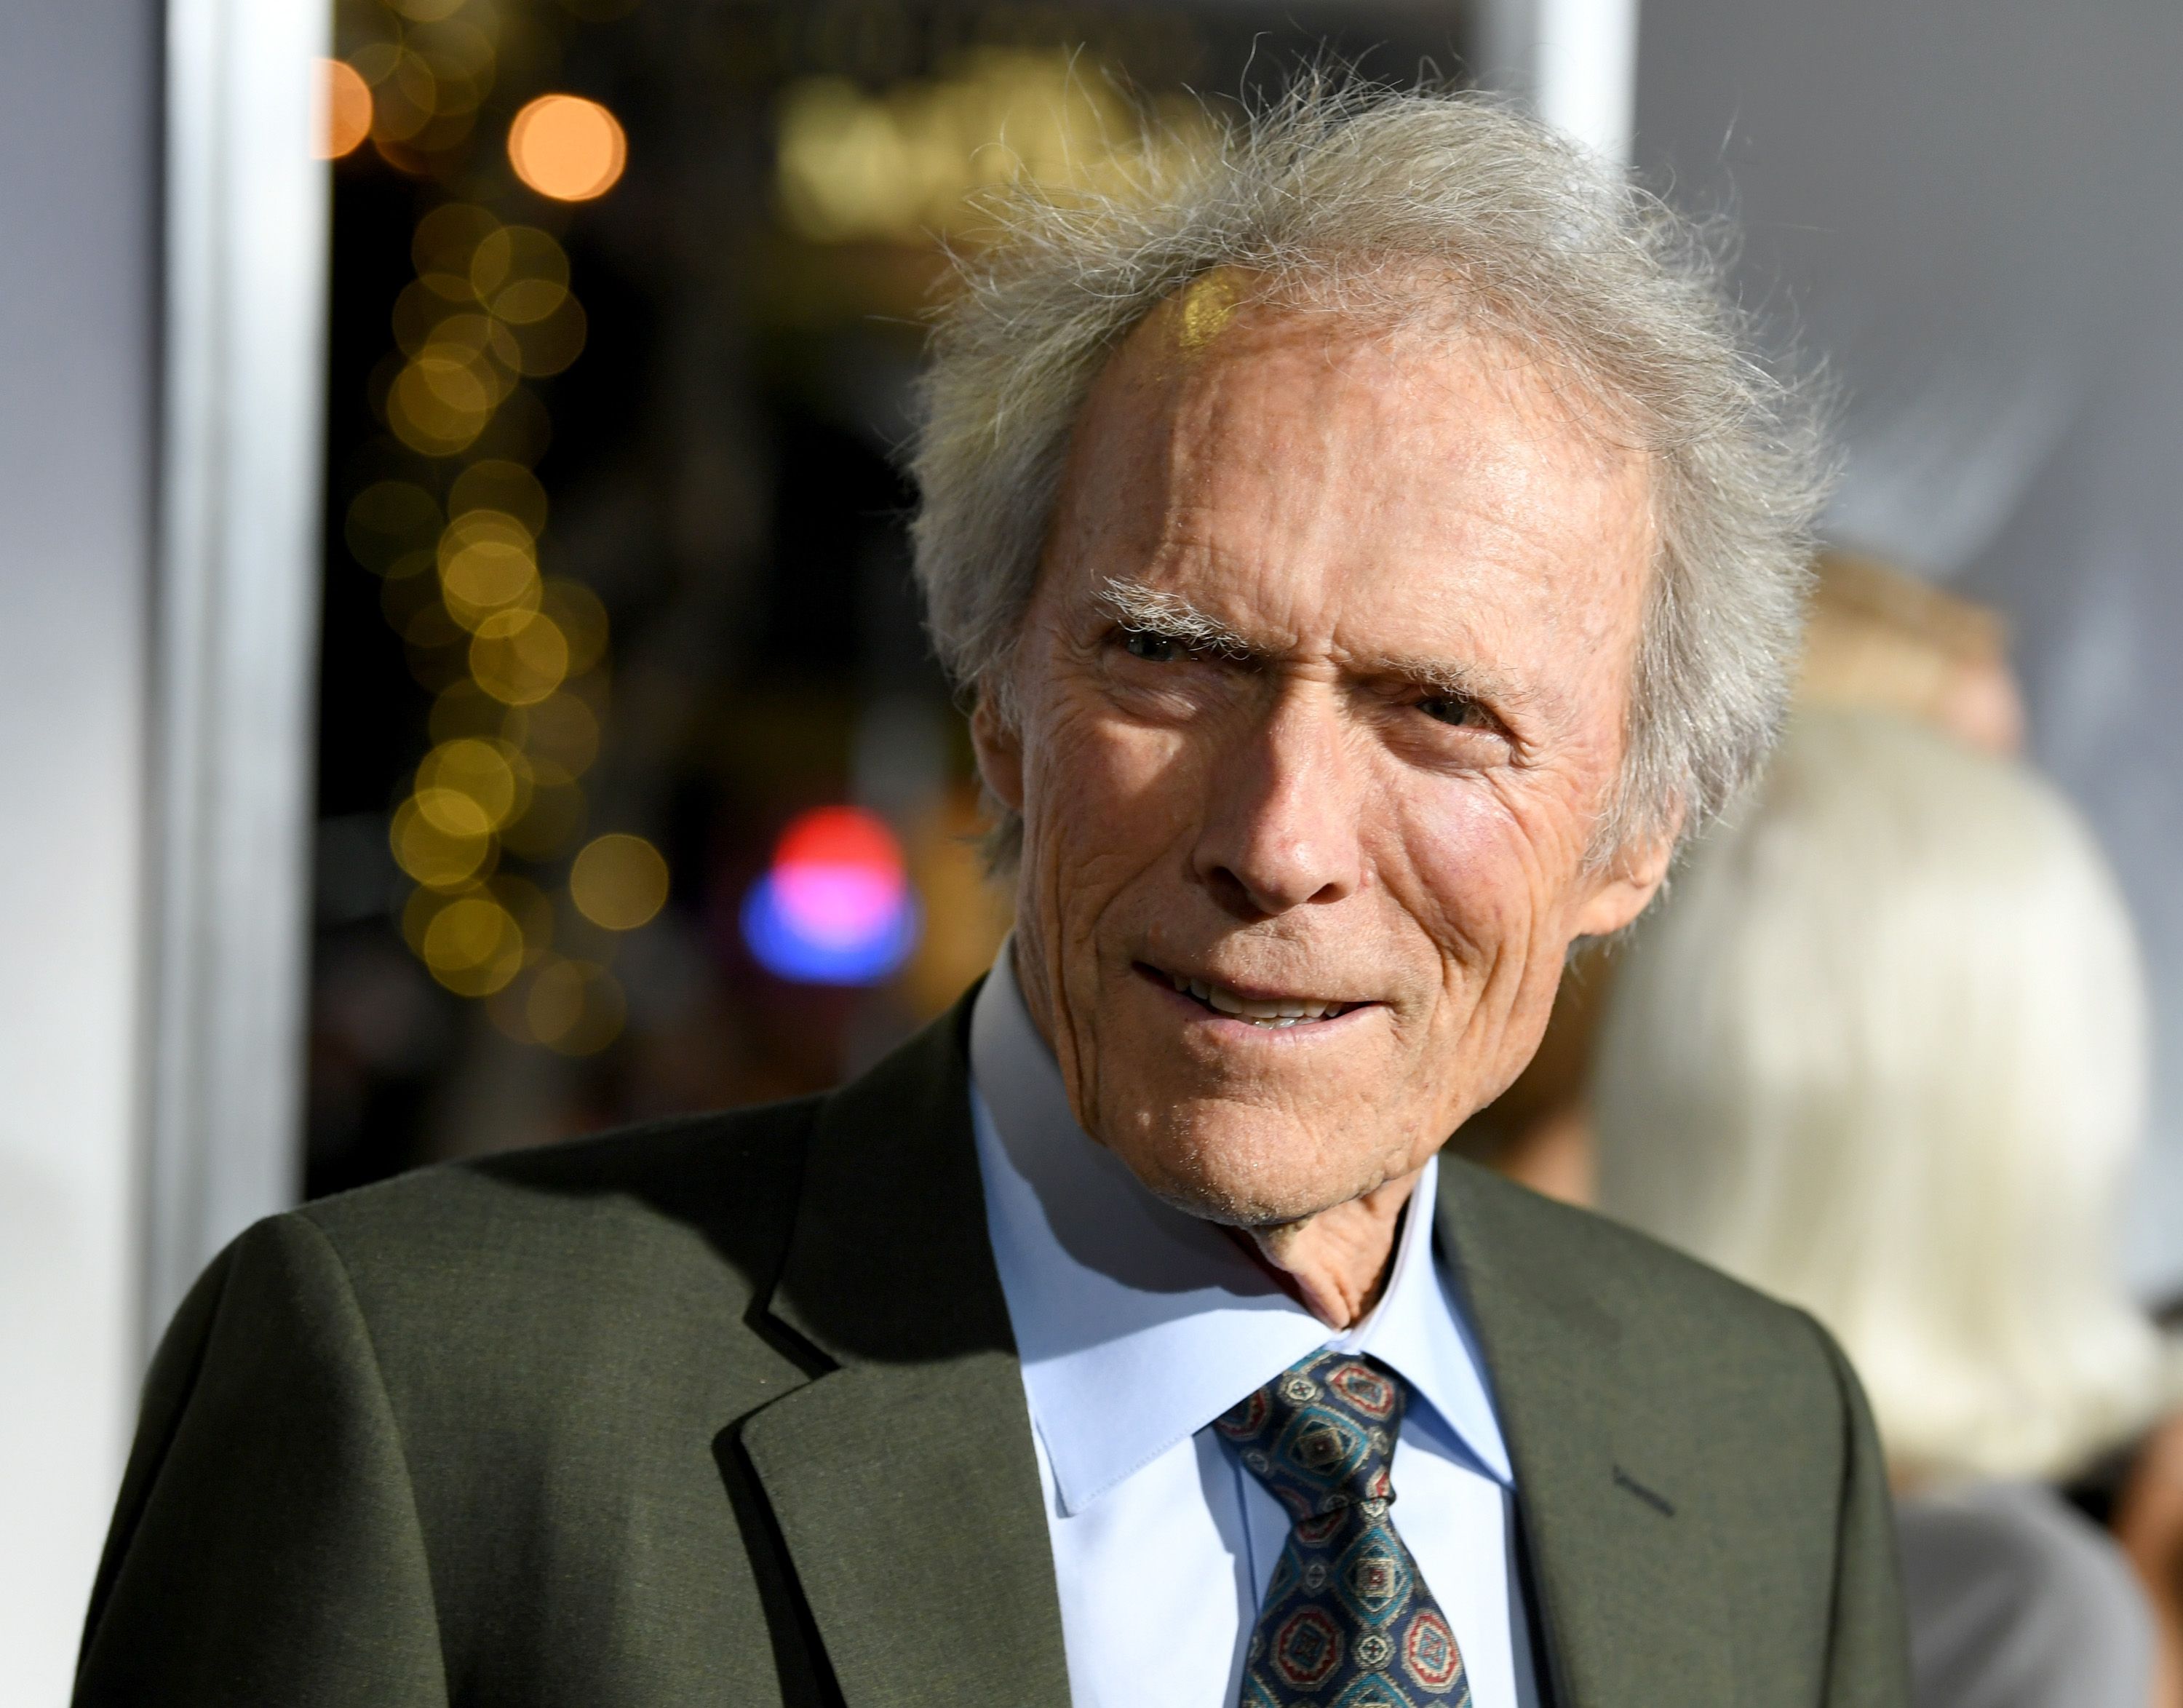 Clint Eastwood at the premiere of Warner Bros. Pictures' "The Mule" at the Village Theatre on December 10, 2018 | Photo: Getty Images